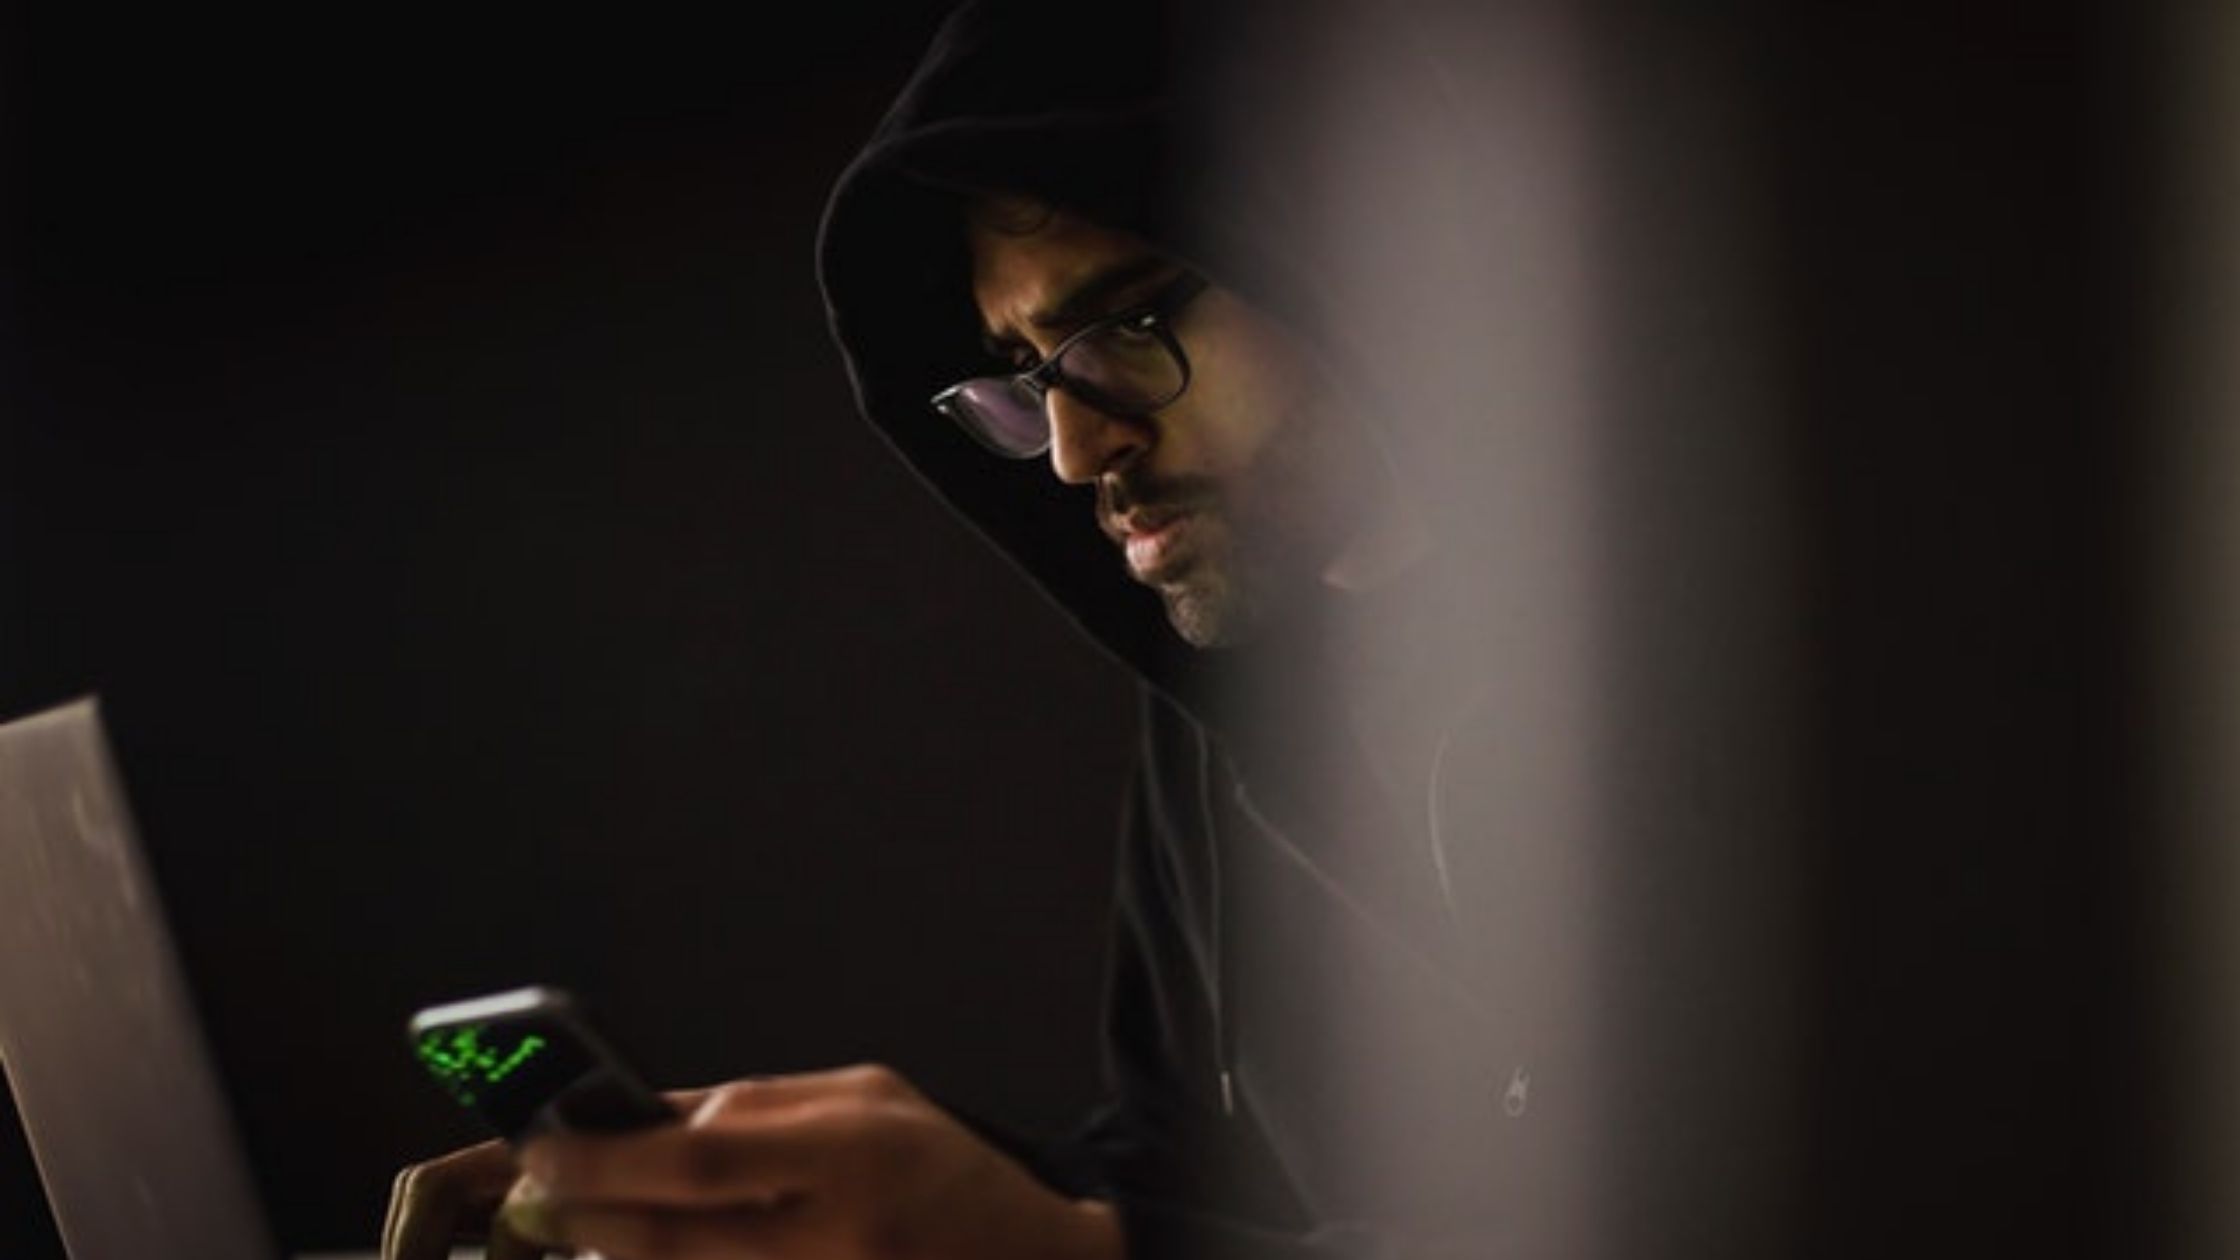 Secure your smartphone How to prevent frauds and cyberattacks